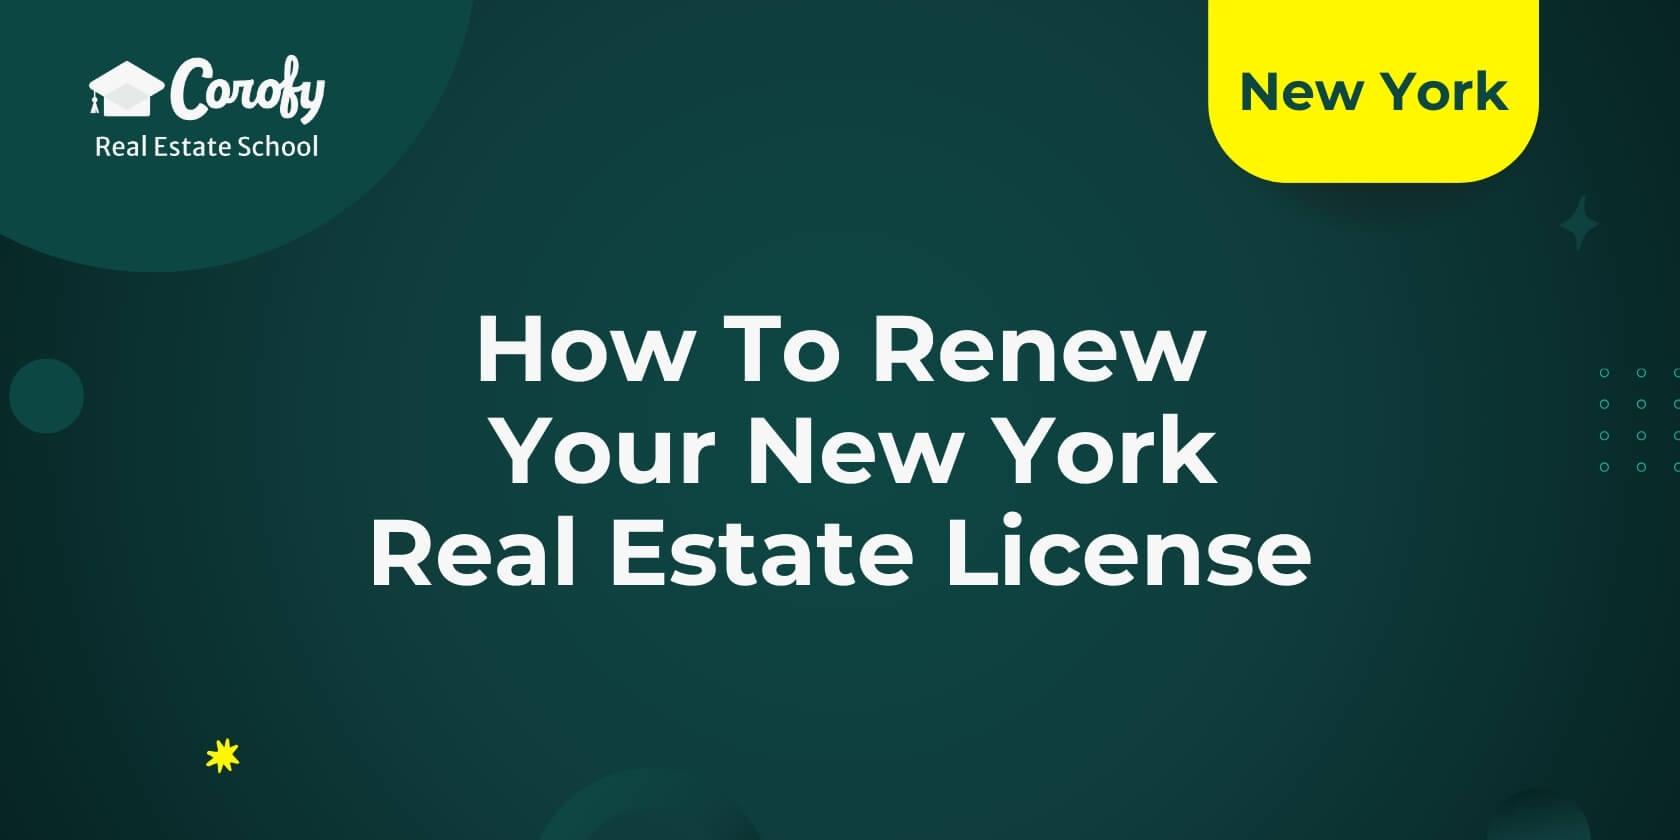 How To Renew Your New York Real Estate License